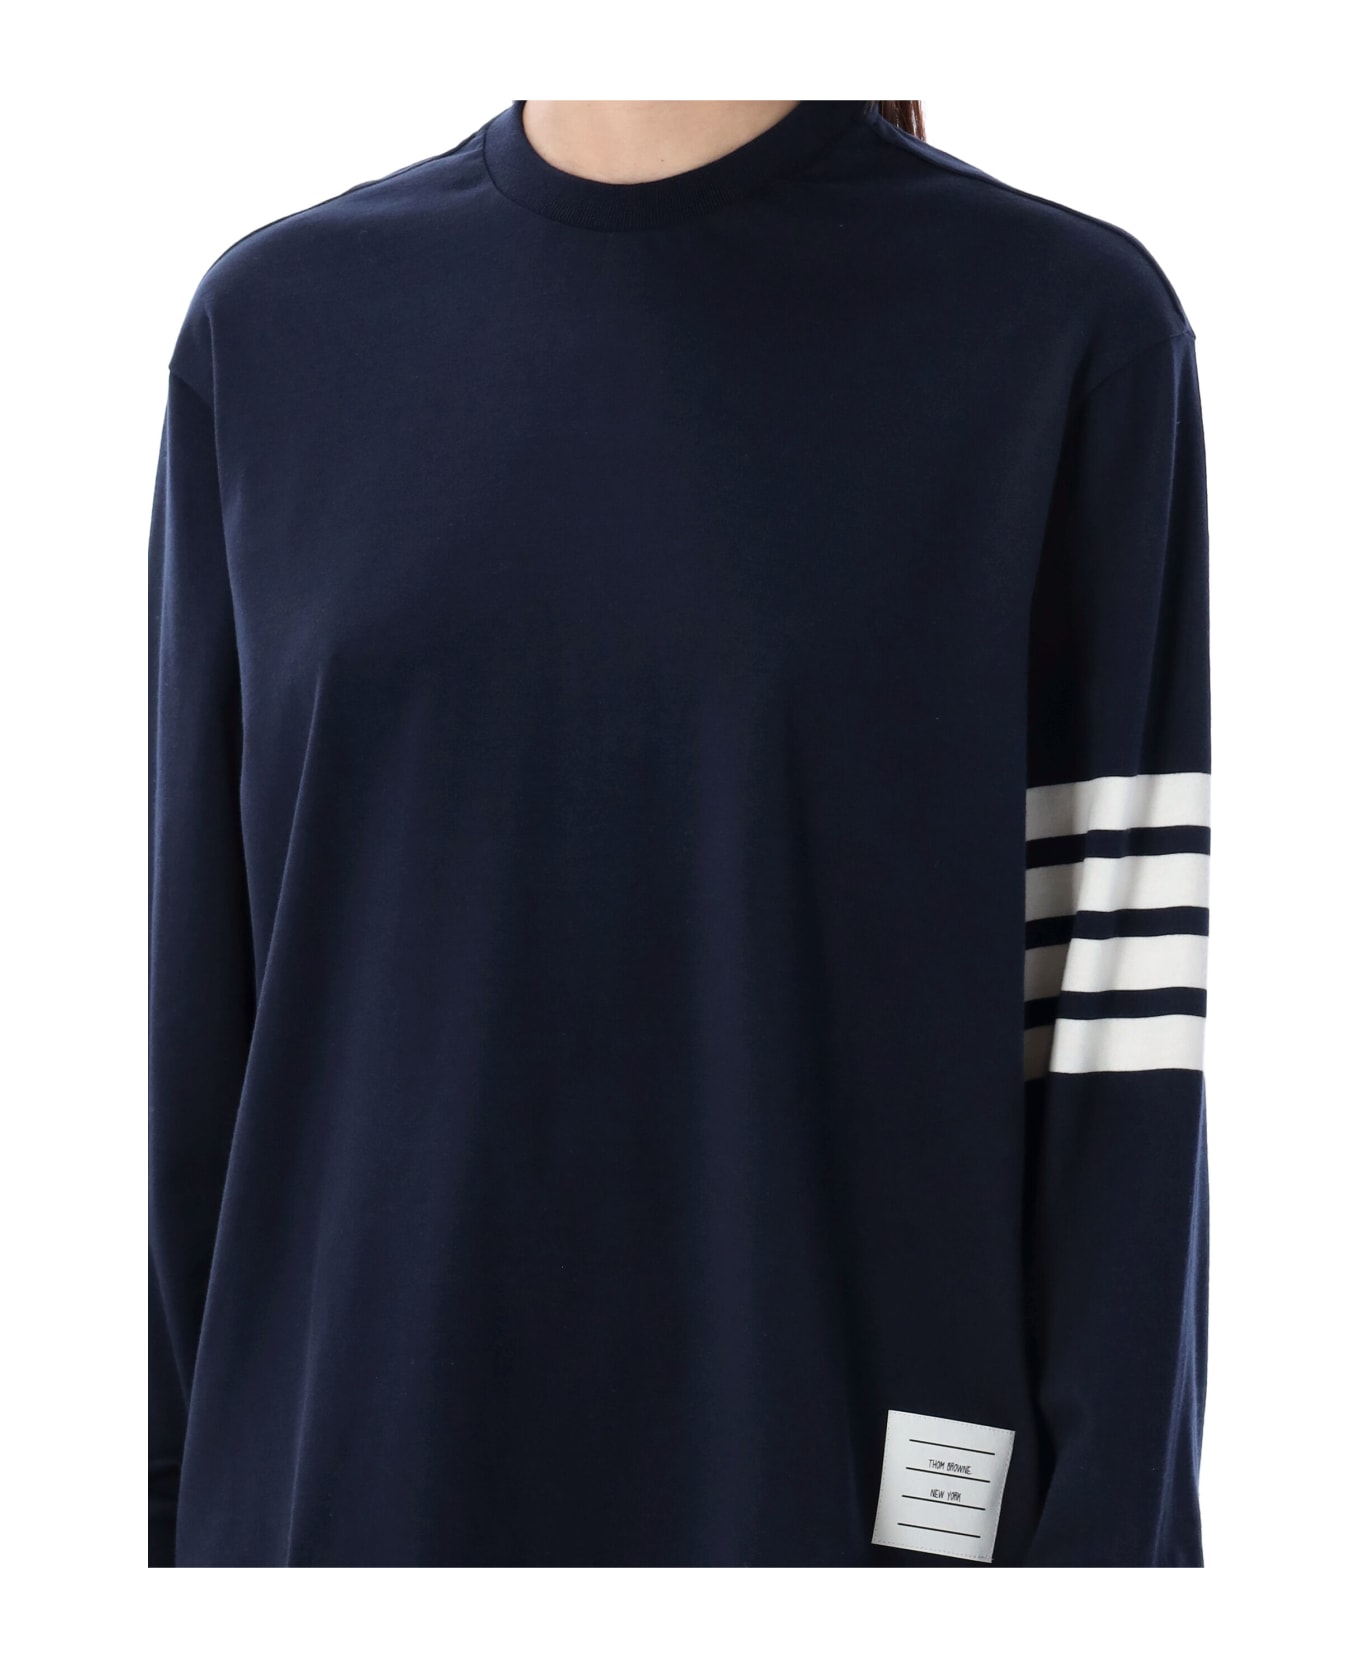 Thom Browne Rugby T-shirt - NAVY